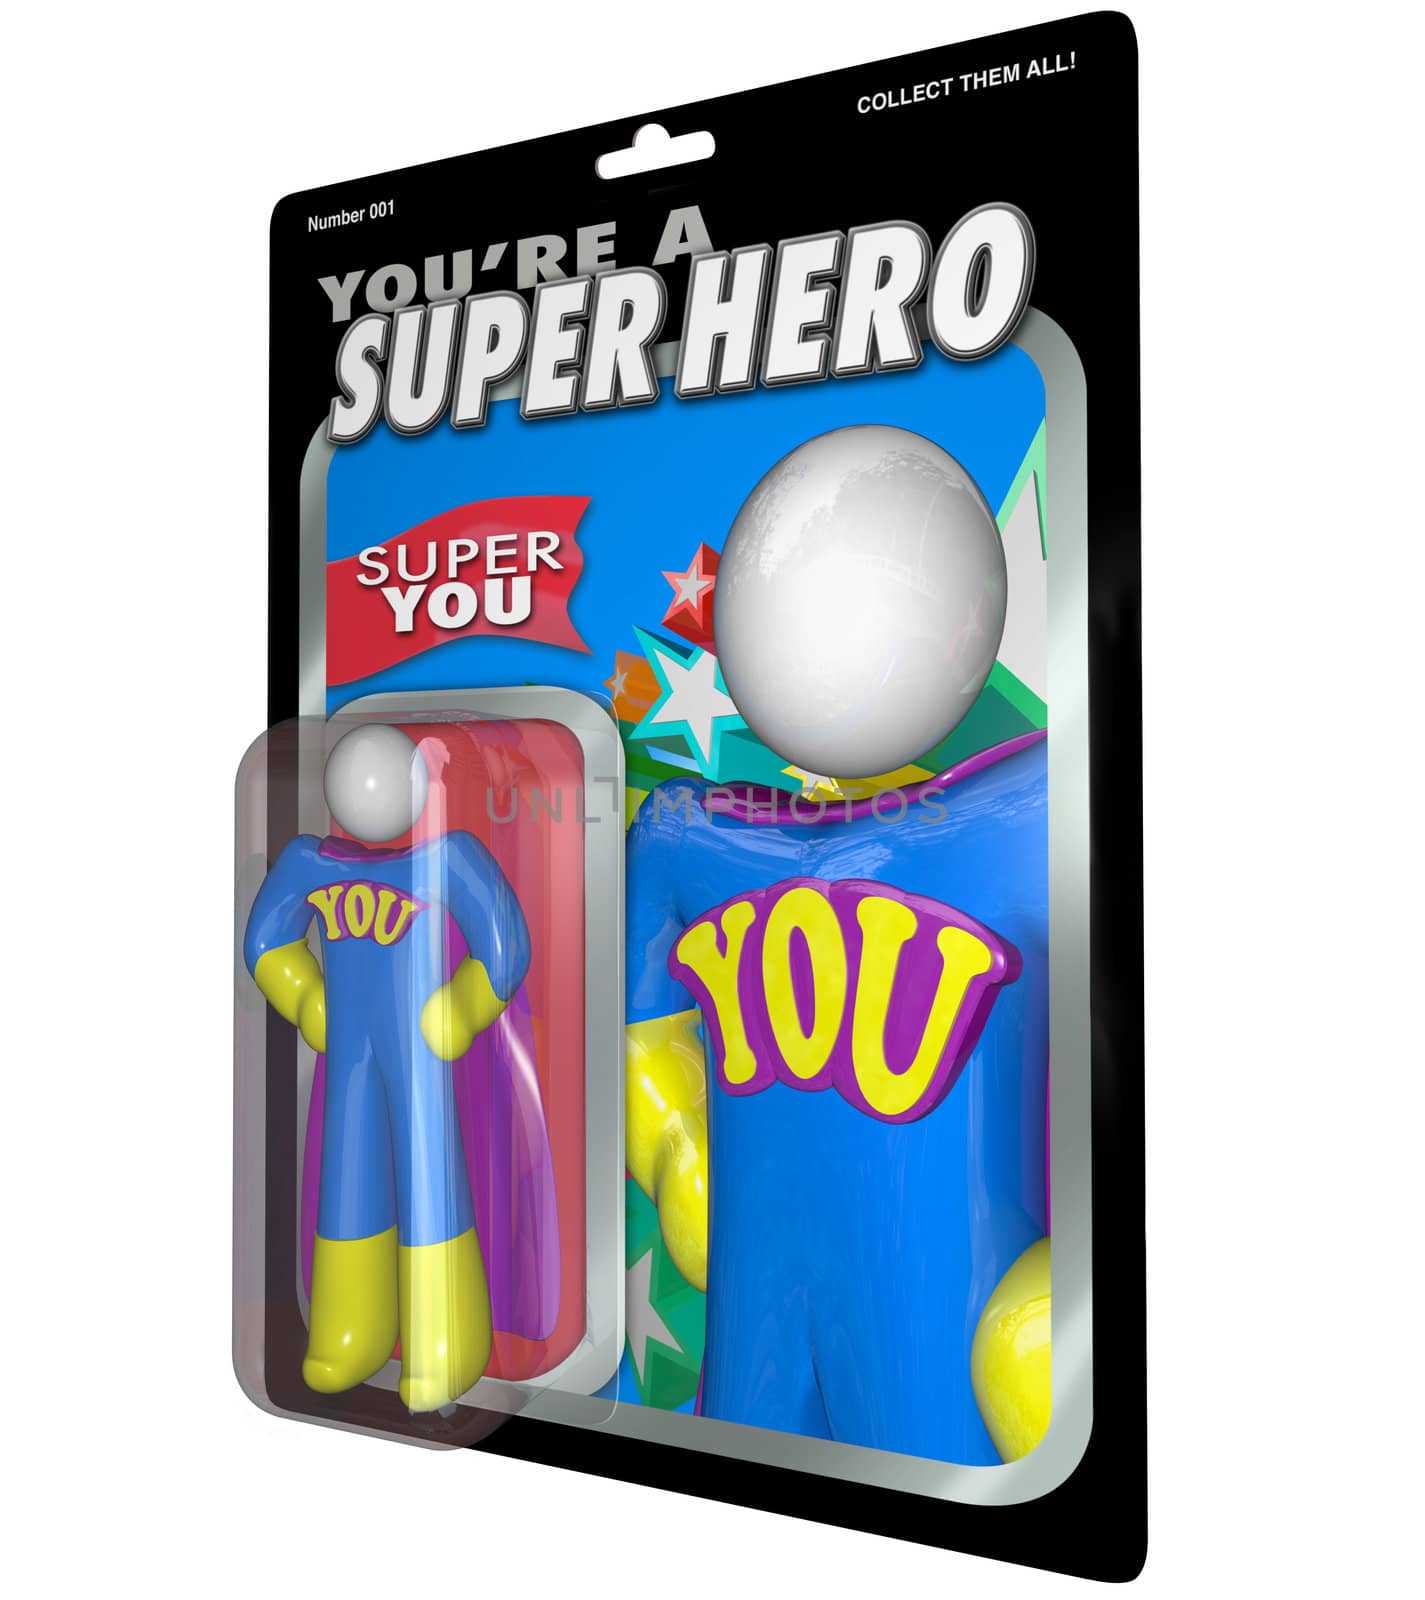 You are a Super Hero, an action figure toy in a package with praise, recognition and appreciation for your outstanding work, casting you as a superhero who achieves great things